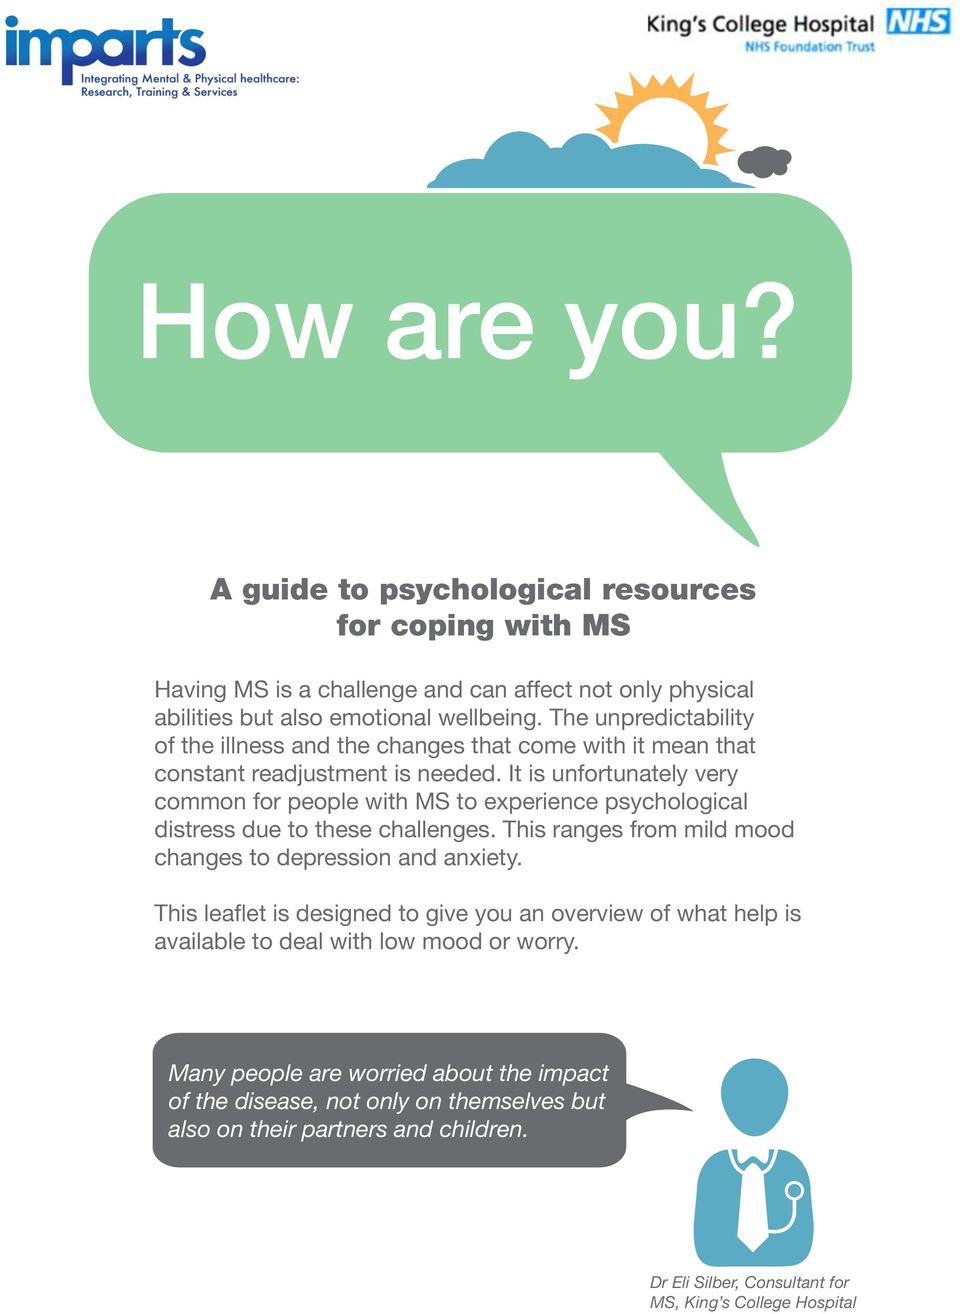 It is unfortunately very common for people with MS to experience psychological distress due to these challenges. This ranges from mild mood changes to depression and anxiety.